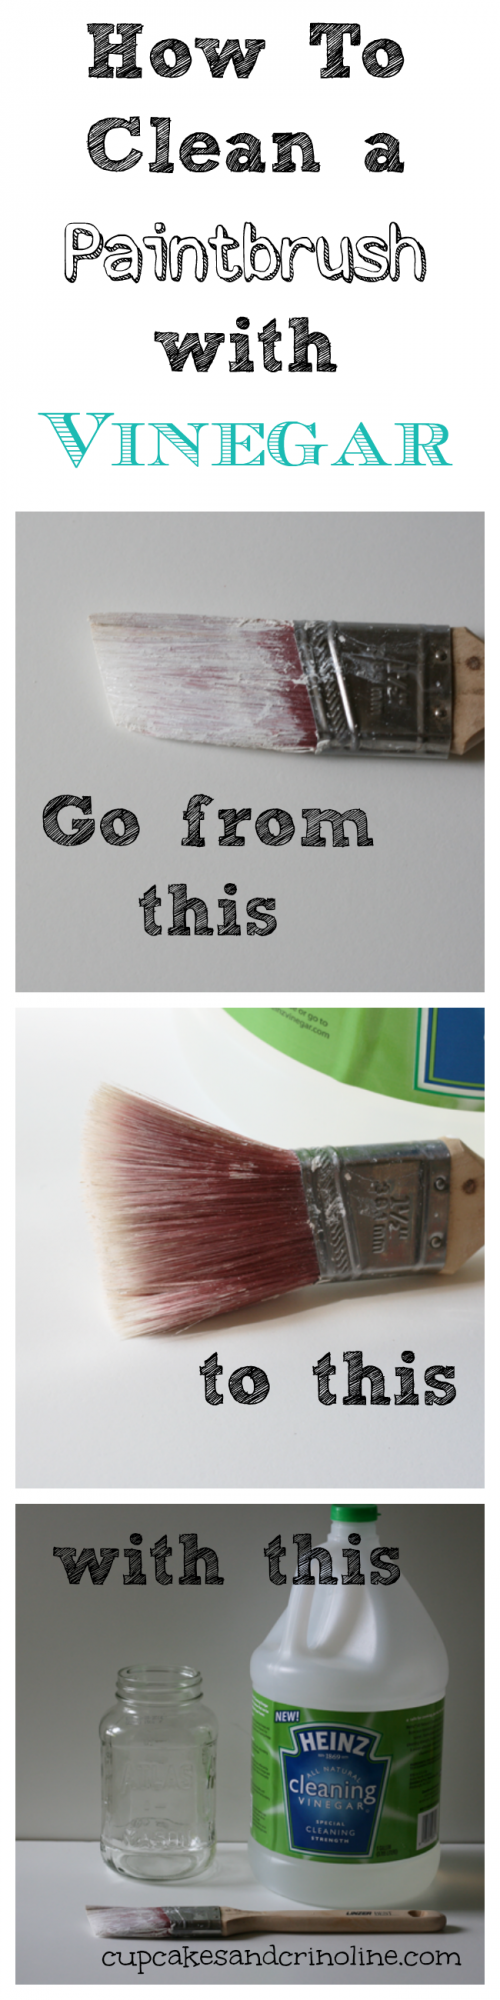 How to clean a paintbrush with vinegar.